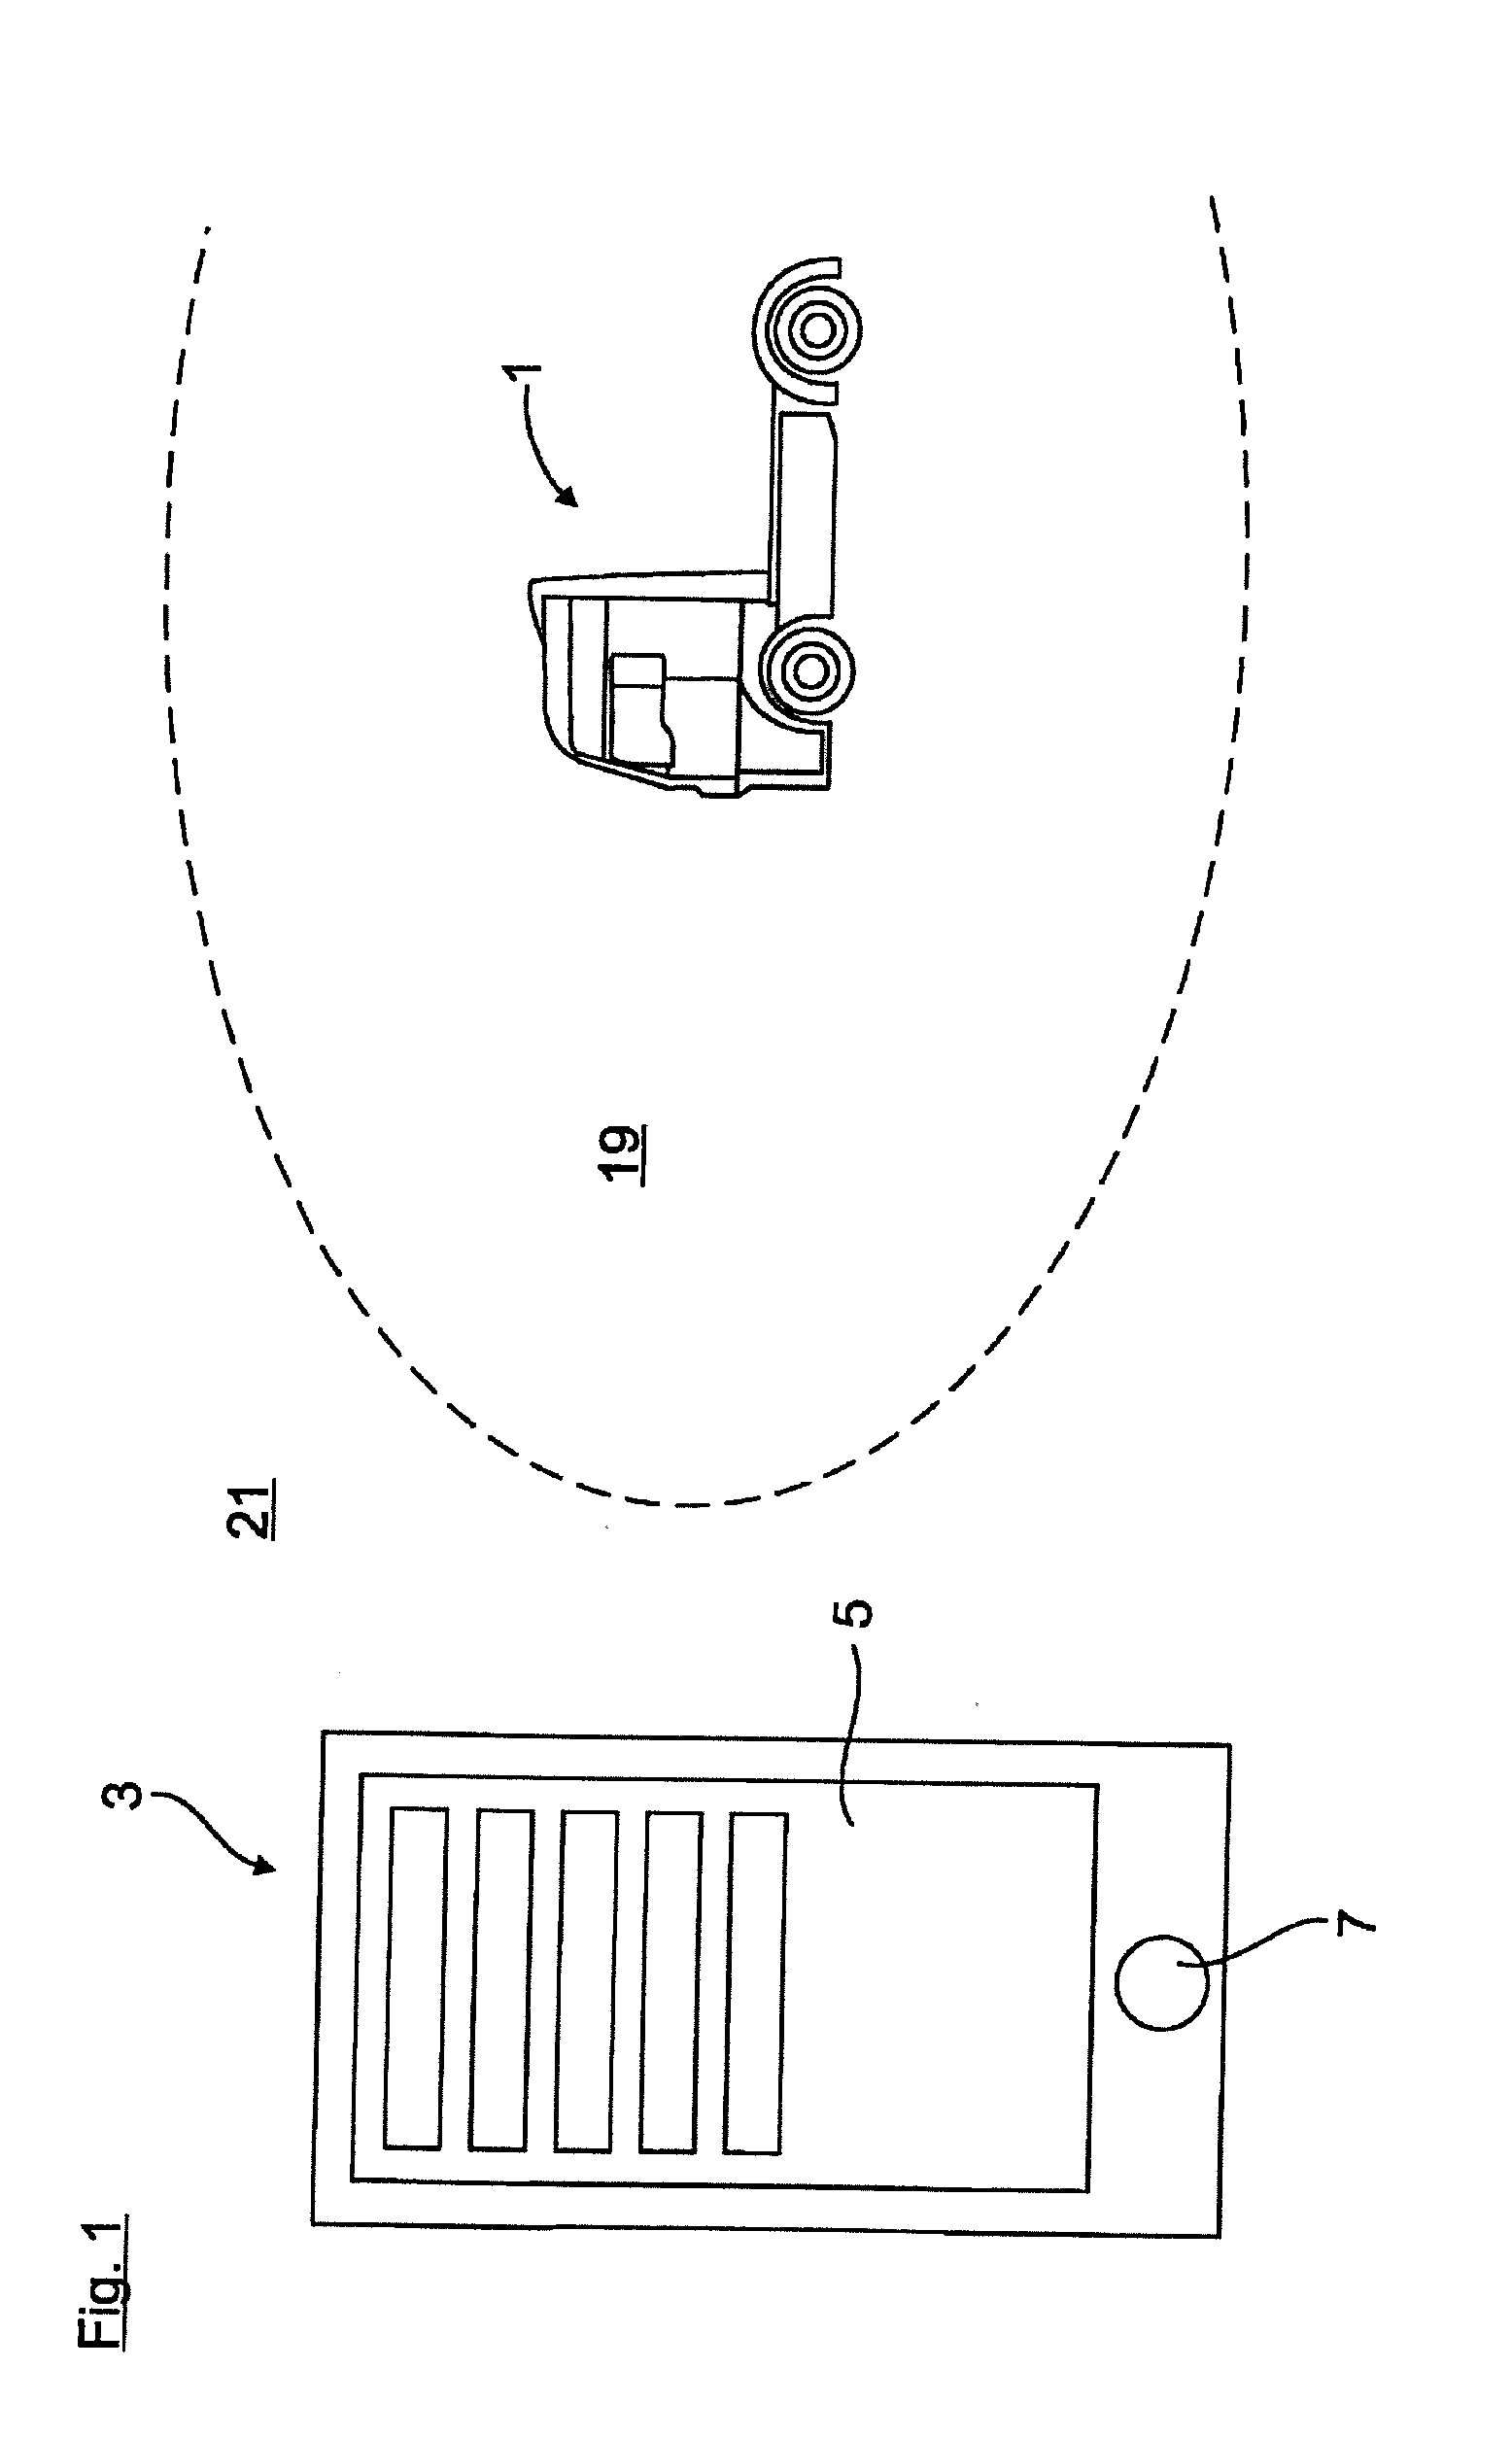 Method and Apparatus for Assisting a Driver of a Vehicle, in Particular of a Commercial Vehicle